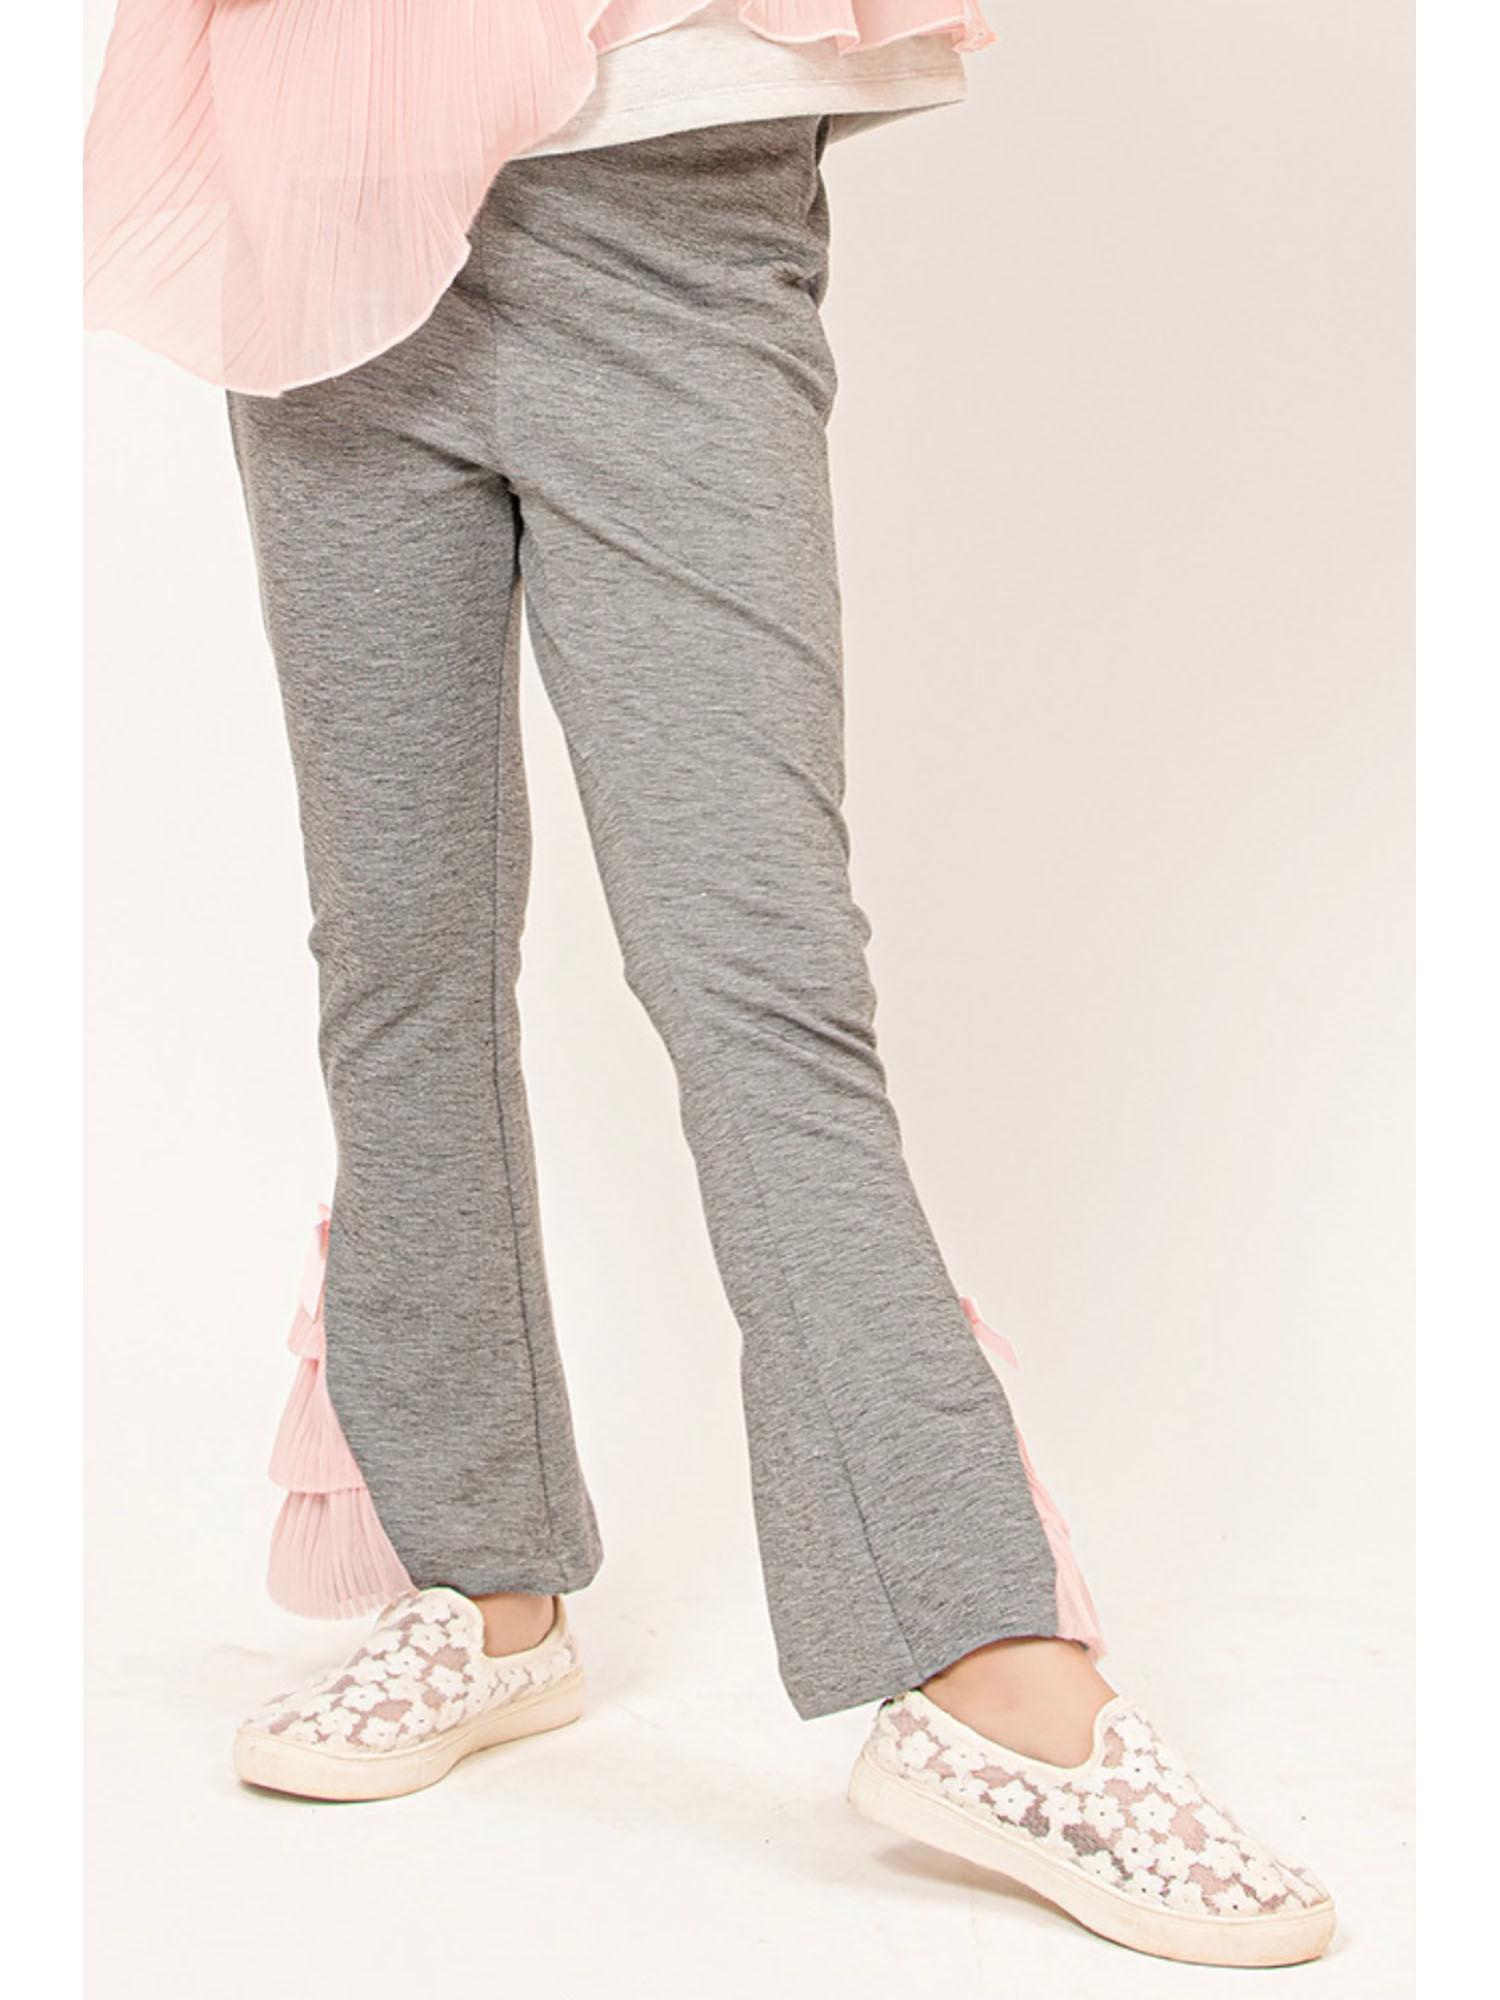 varsity chic grey bell bottoms with baby pink frills